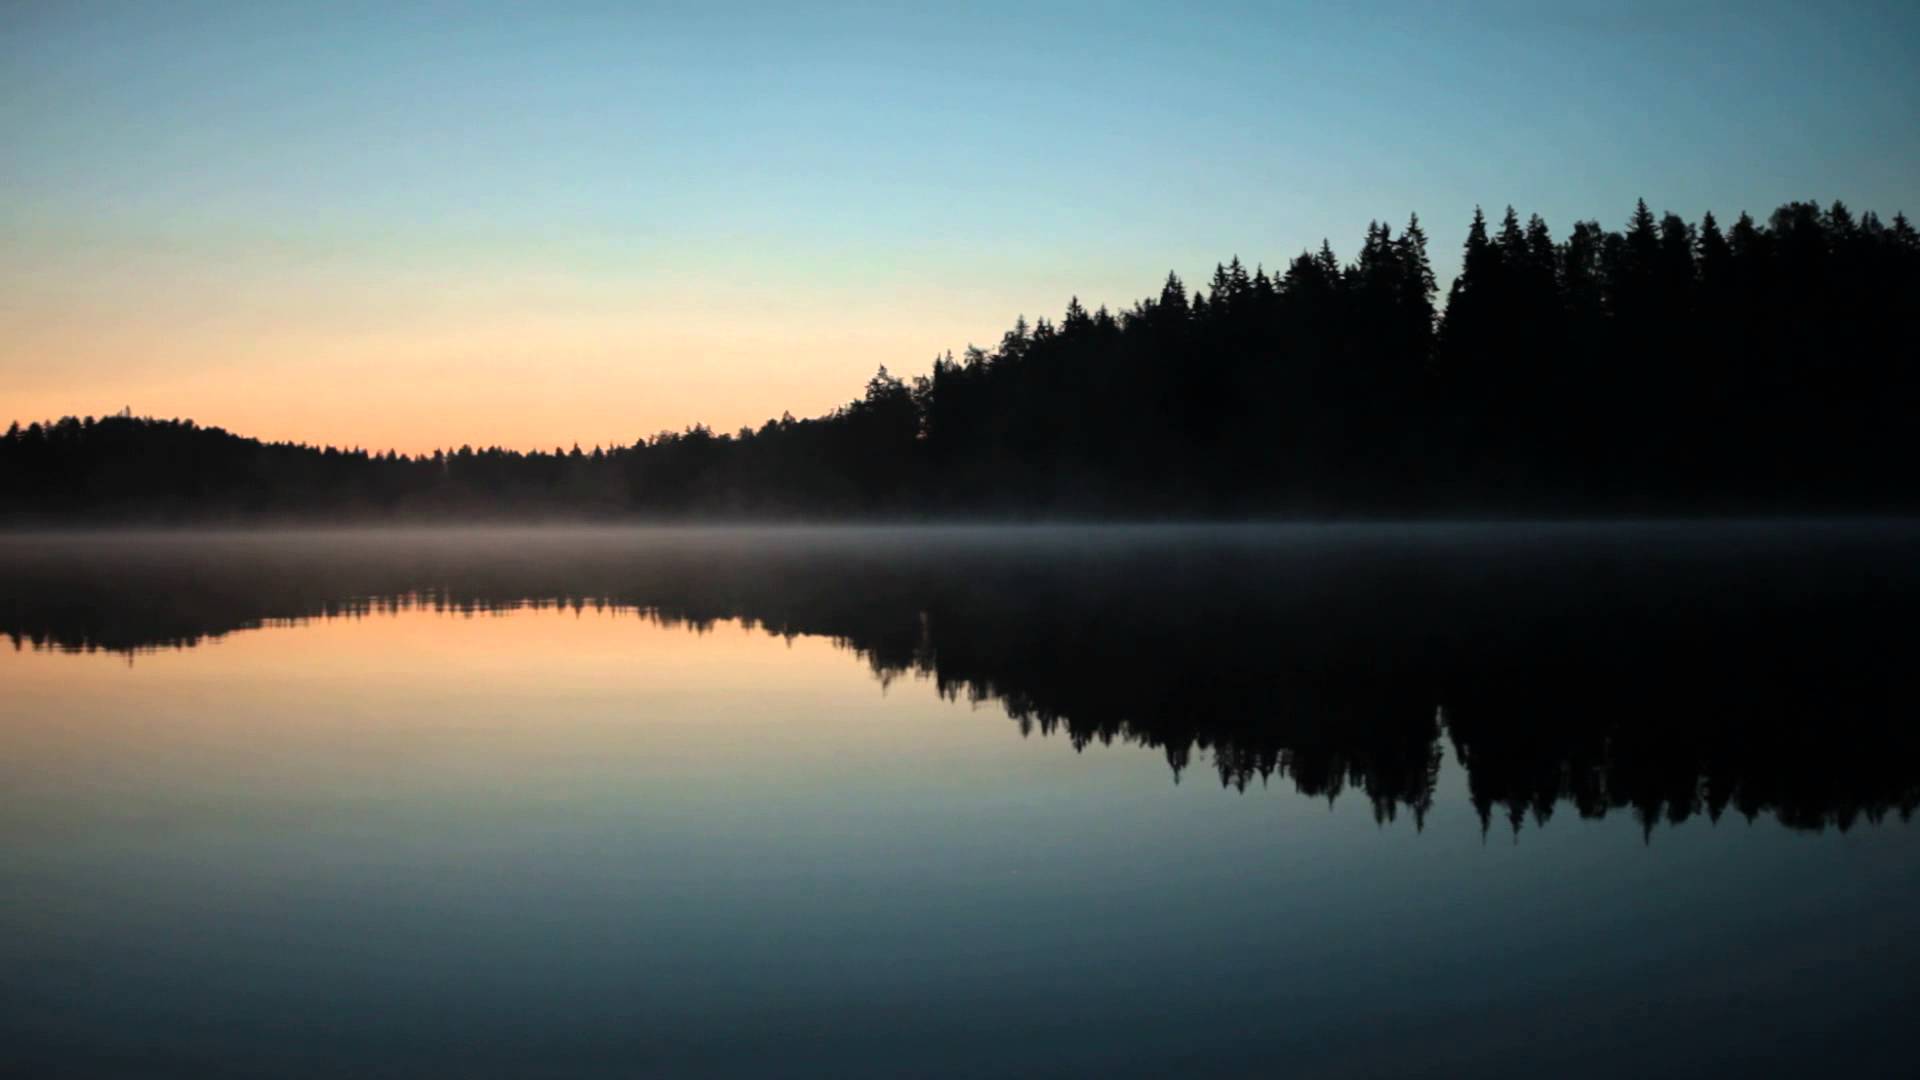 Absolutely nothing: Quiet and calm lake night scenery in Finland ...